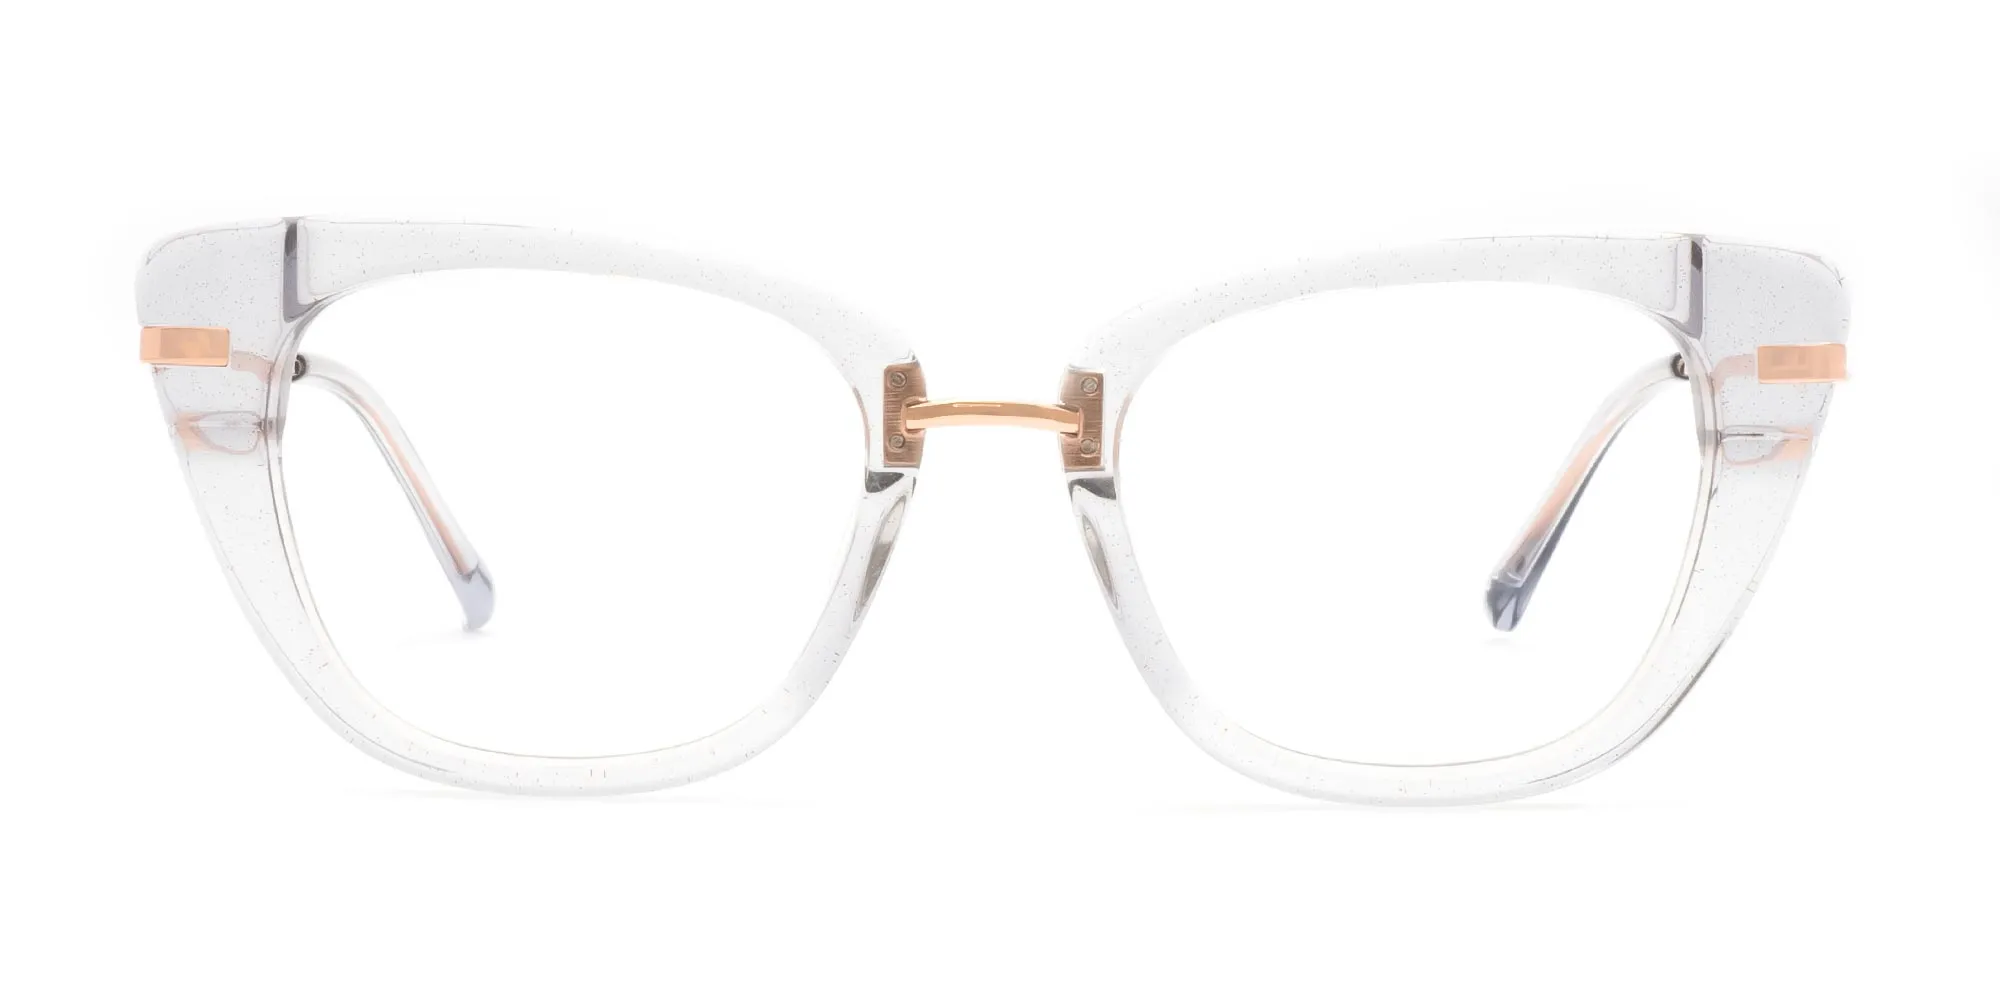 spectacles frames for ladies-2